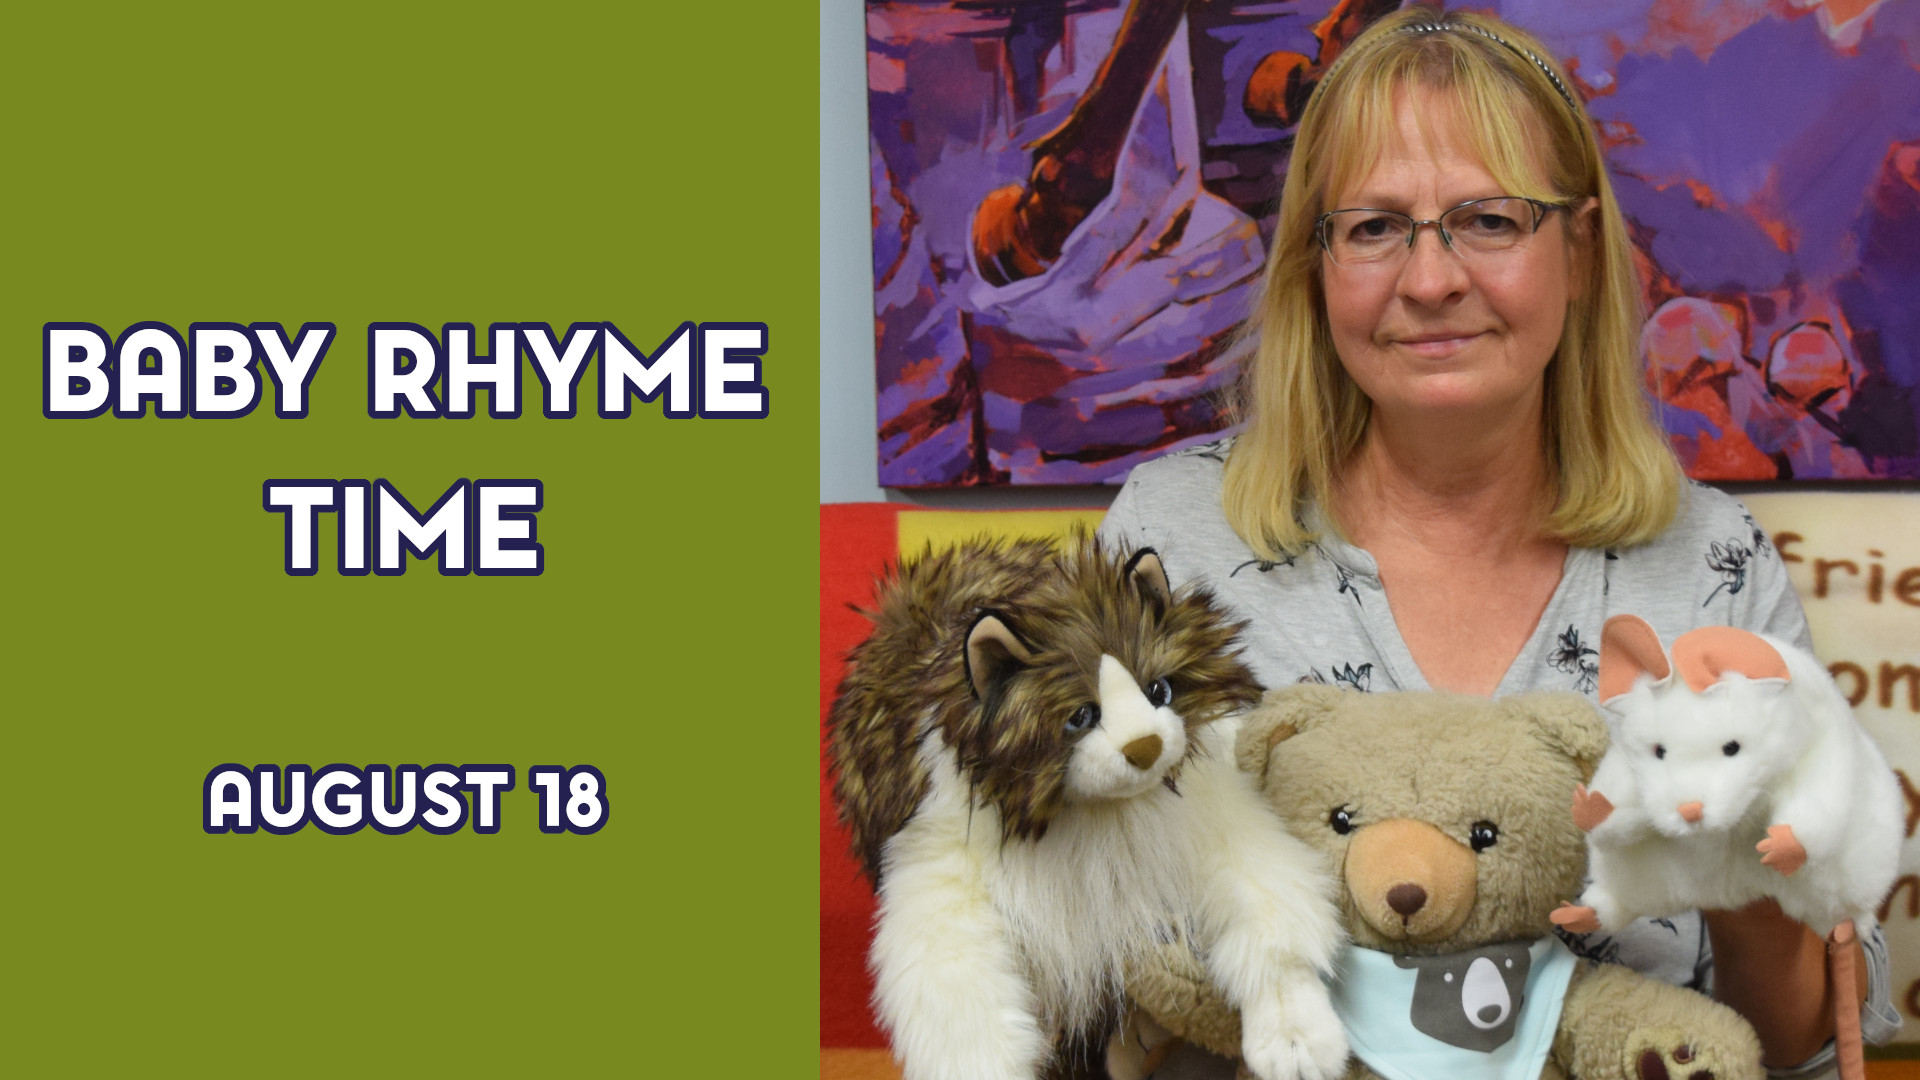 A woman holds stuffed animals next to the text "Baby Rhyme Time August 18"